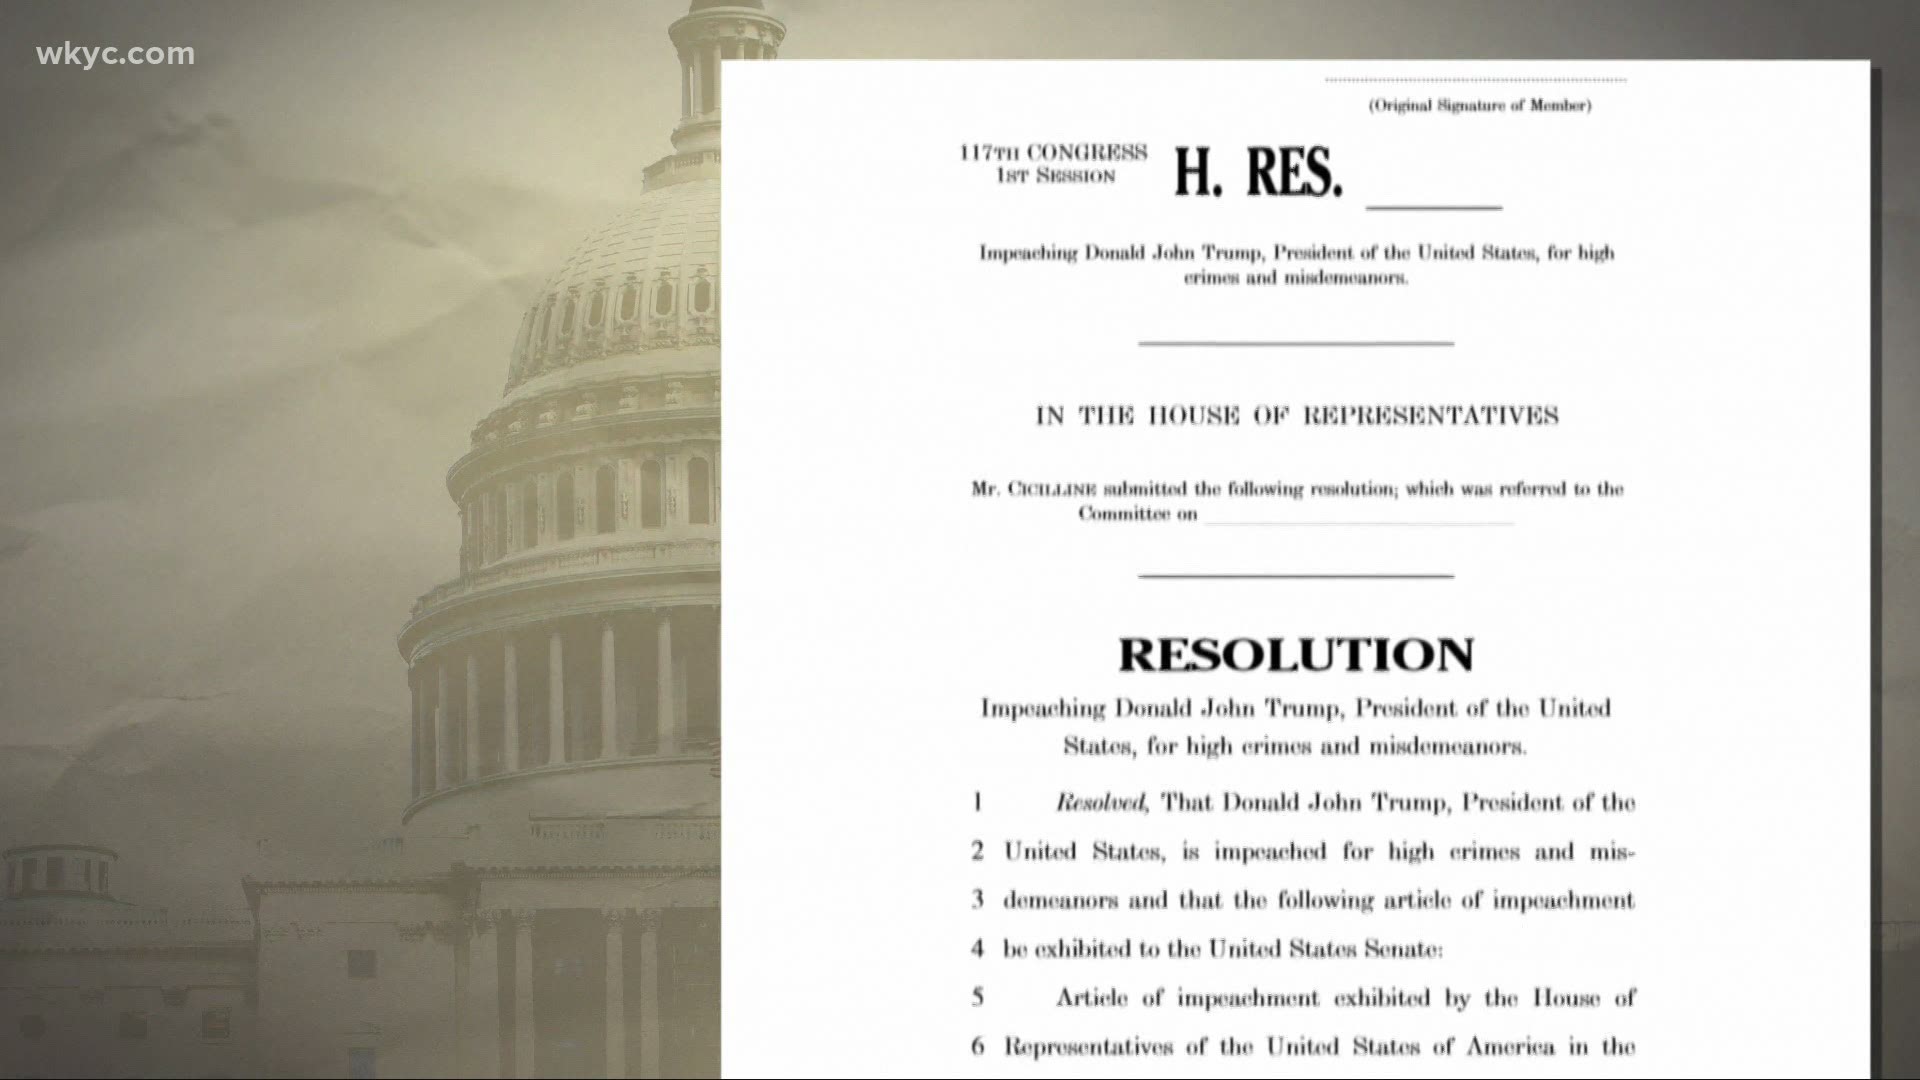 New Articles of Impeachment are expected to be presented by the House of Representatives this week against President Donald Trump.